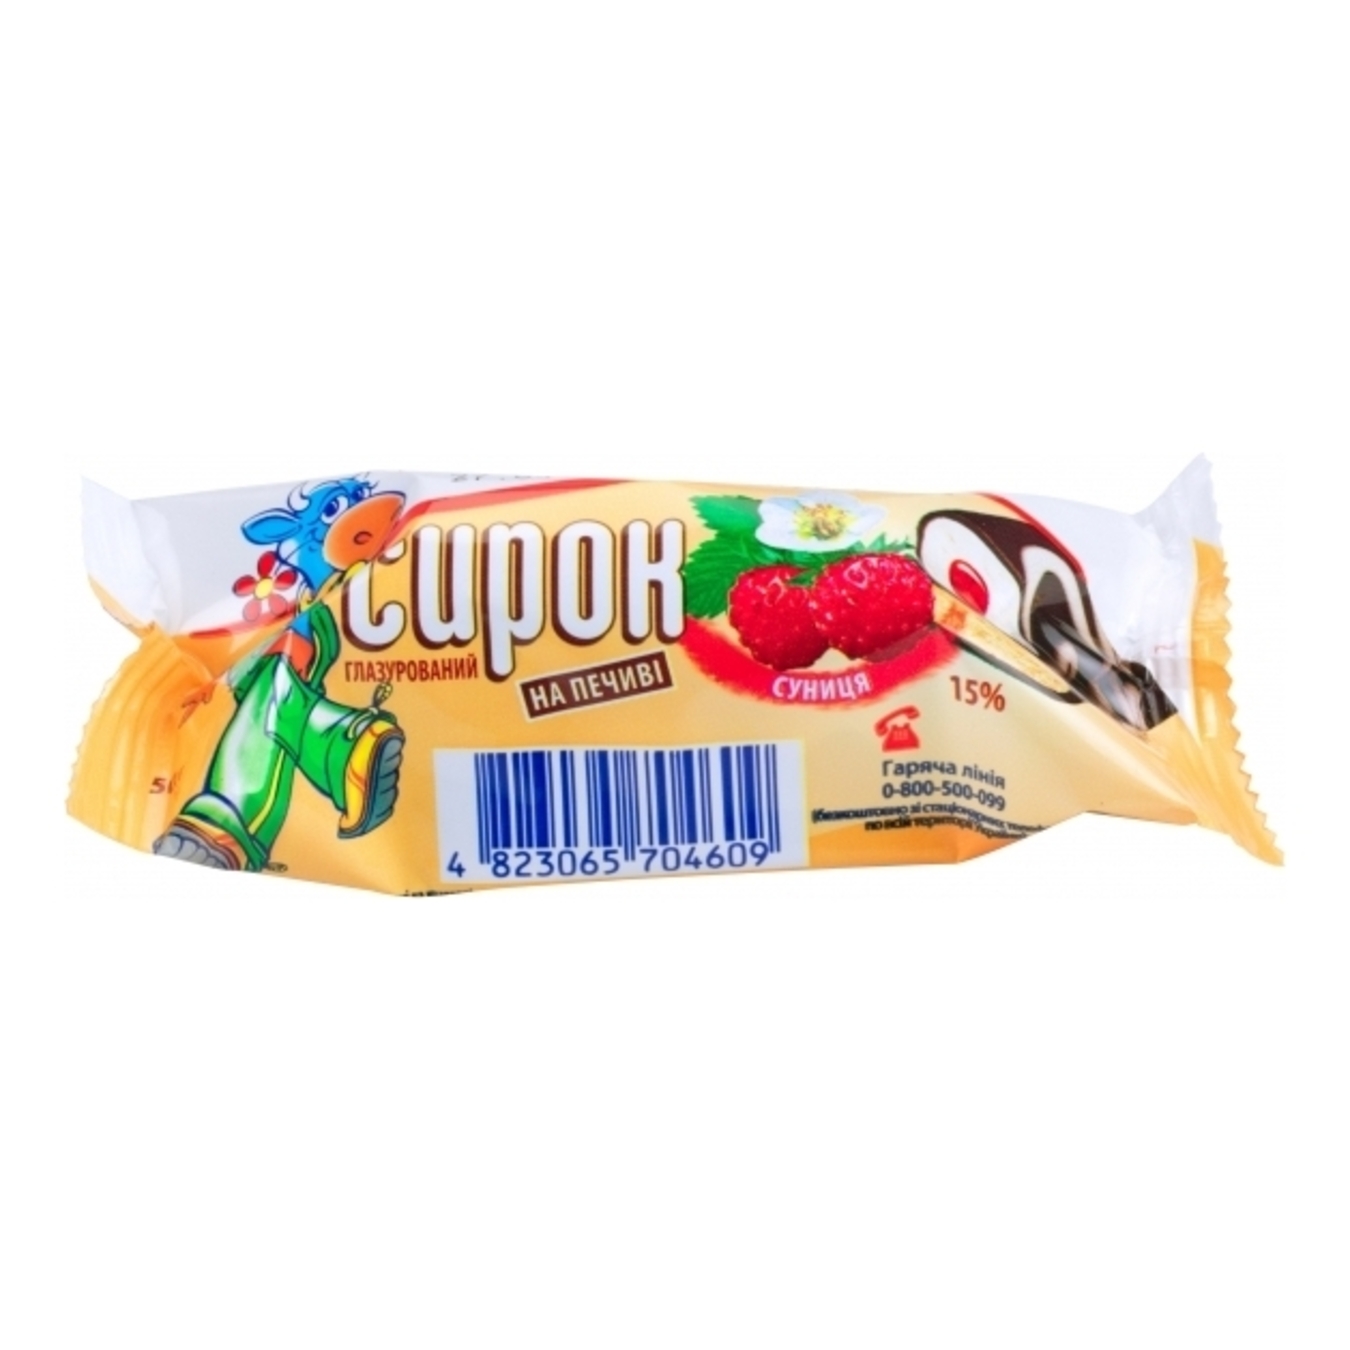 Fanni Glazed Curd Snack with Wild Strawberry Filling on a Cookie 15% 50g